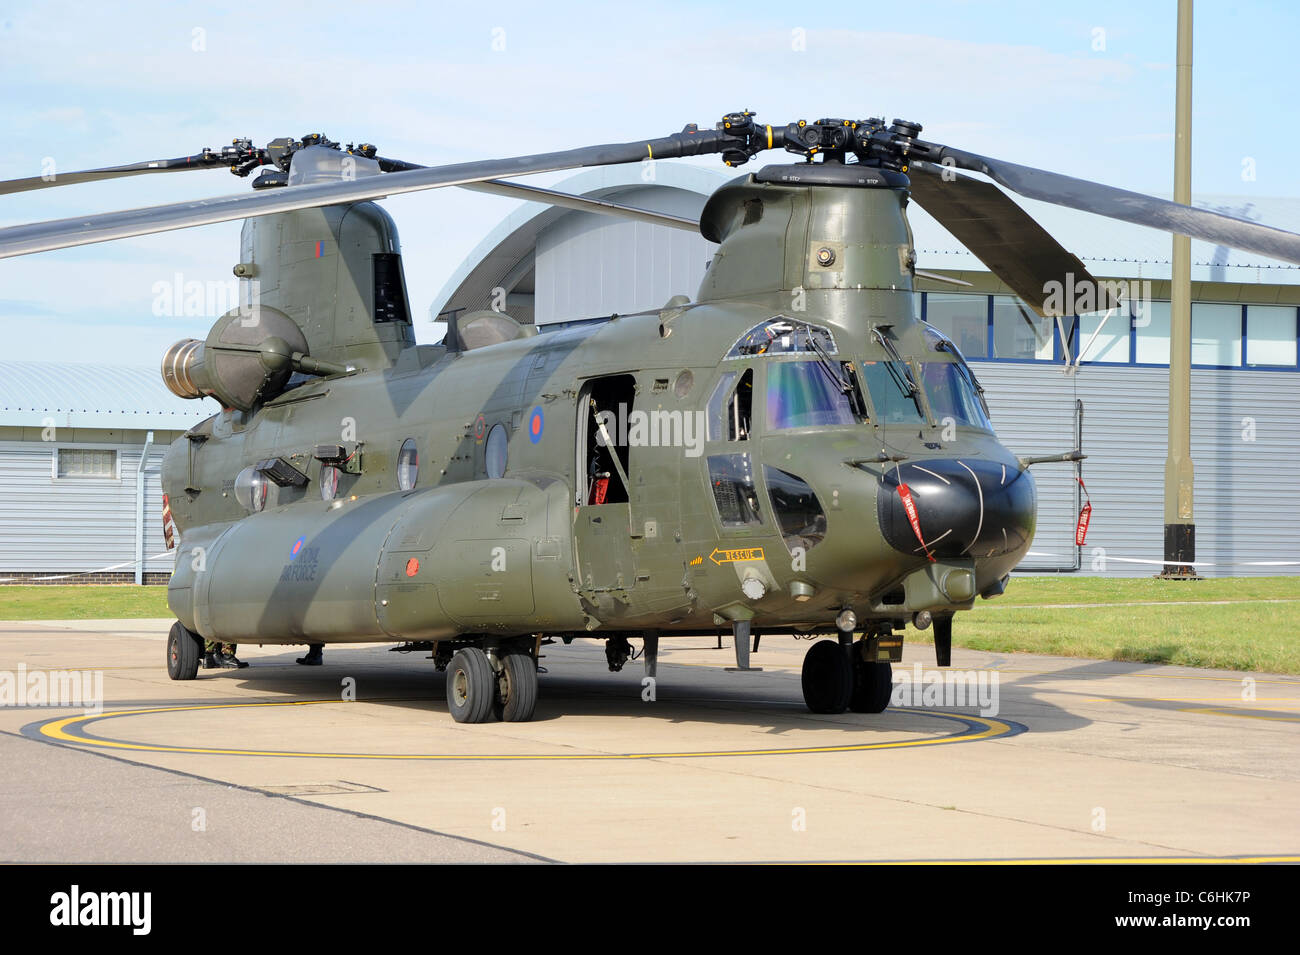 RAF's latest heavy lift helicopter the Chinook HC.3 up close Stock Photo